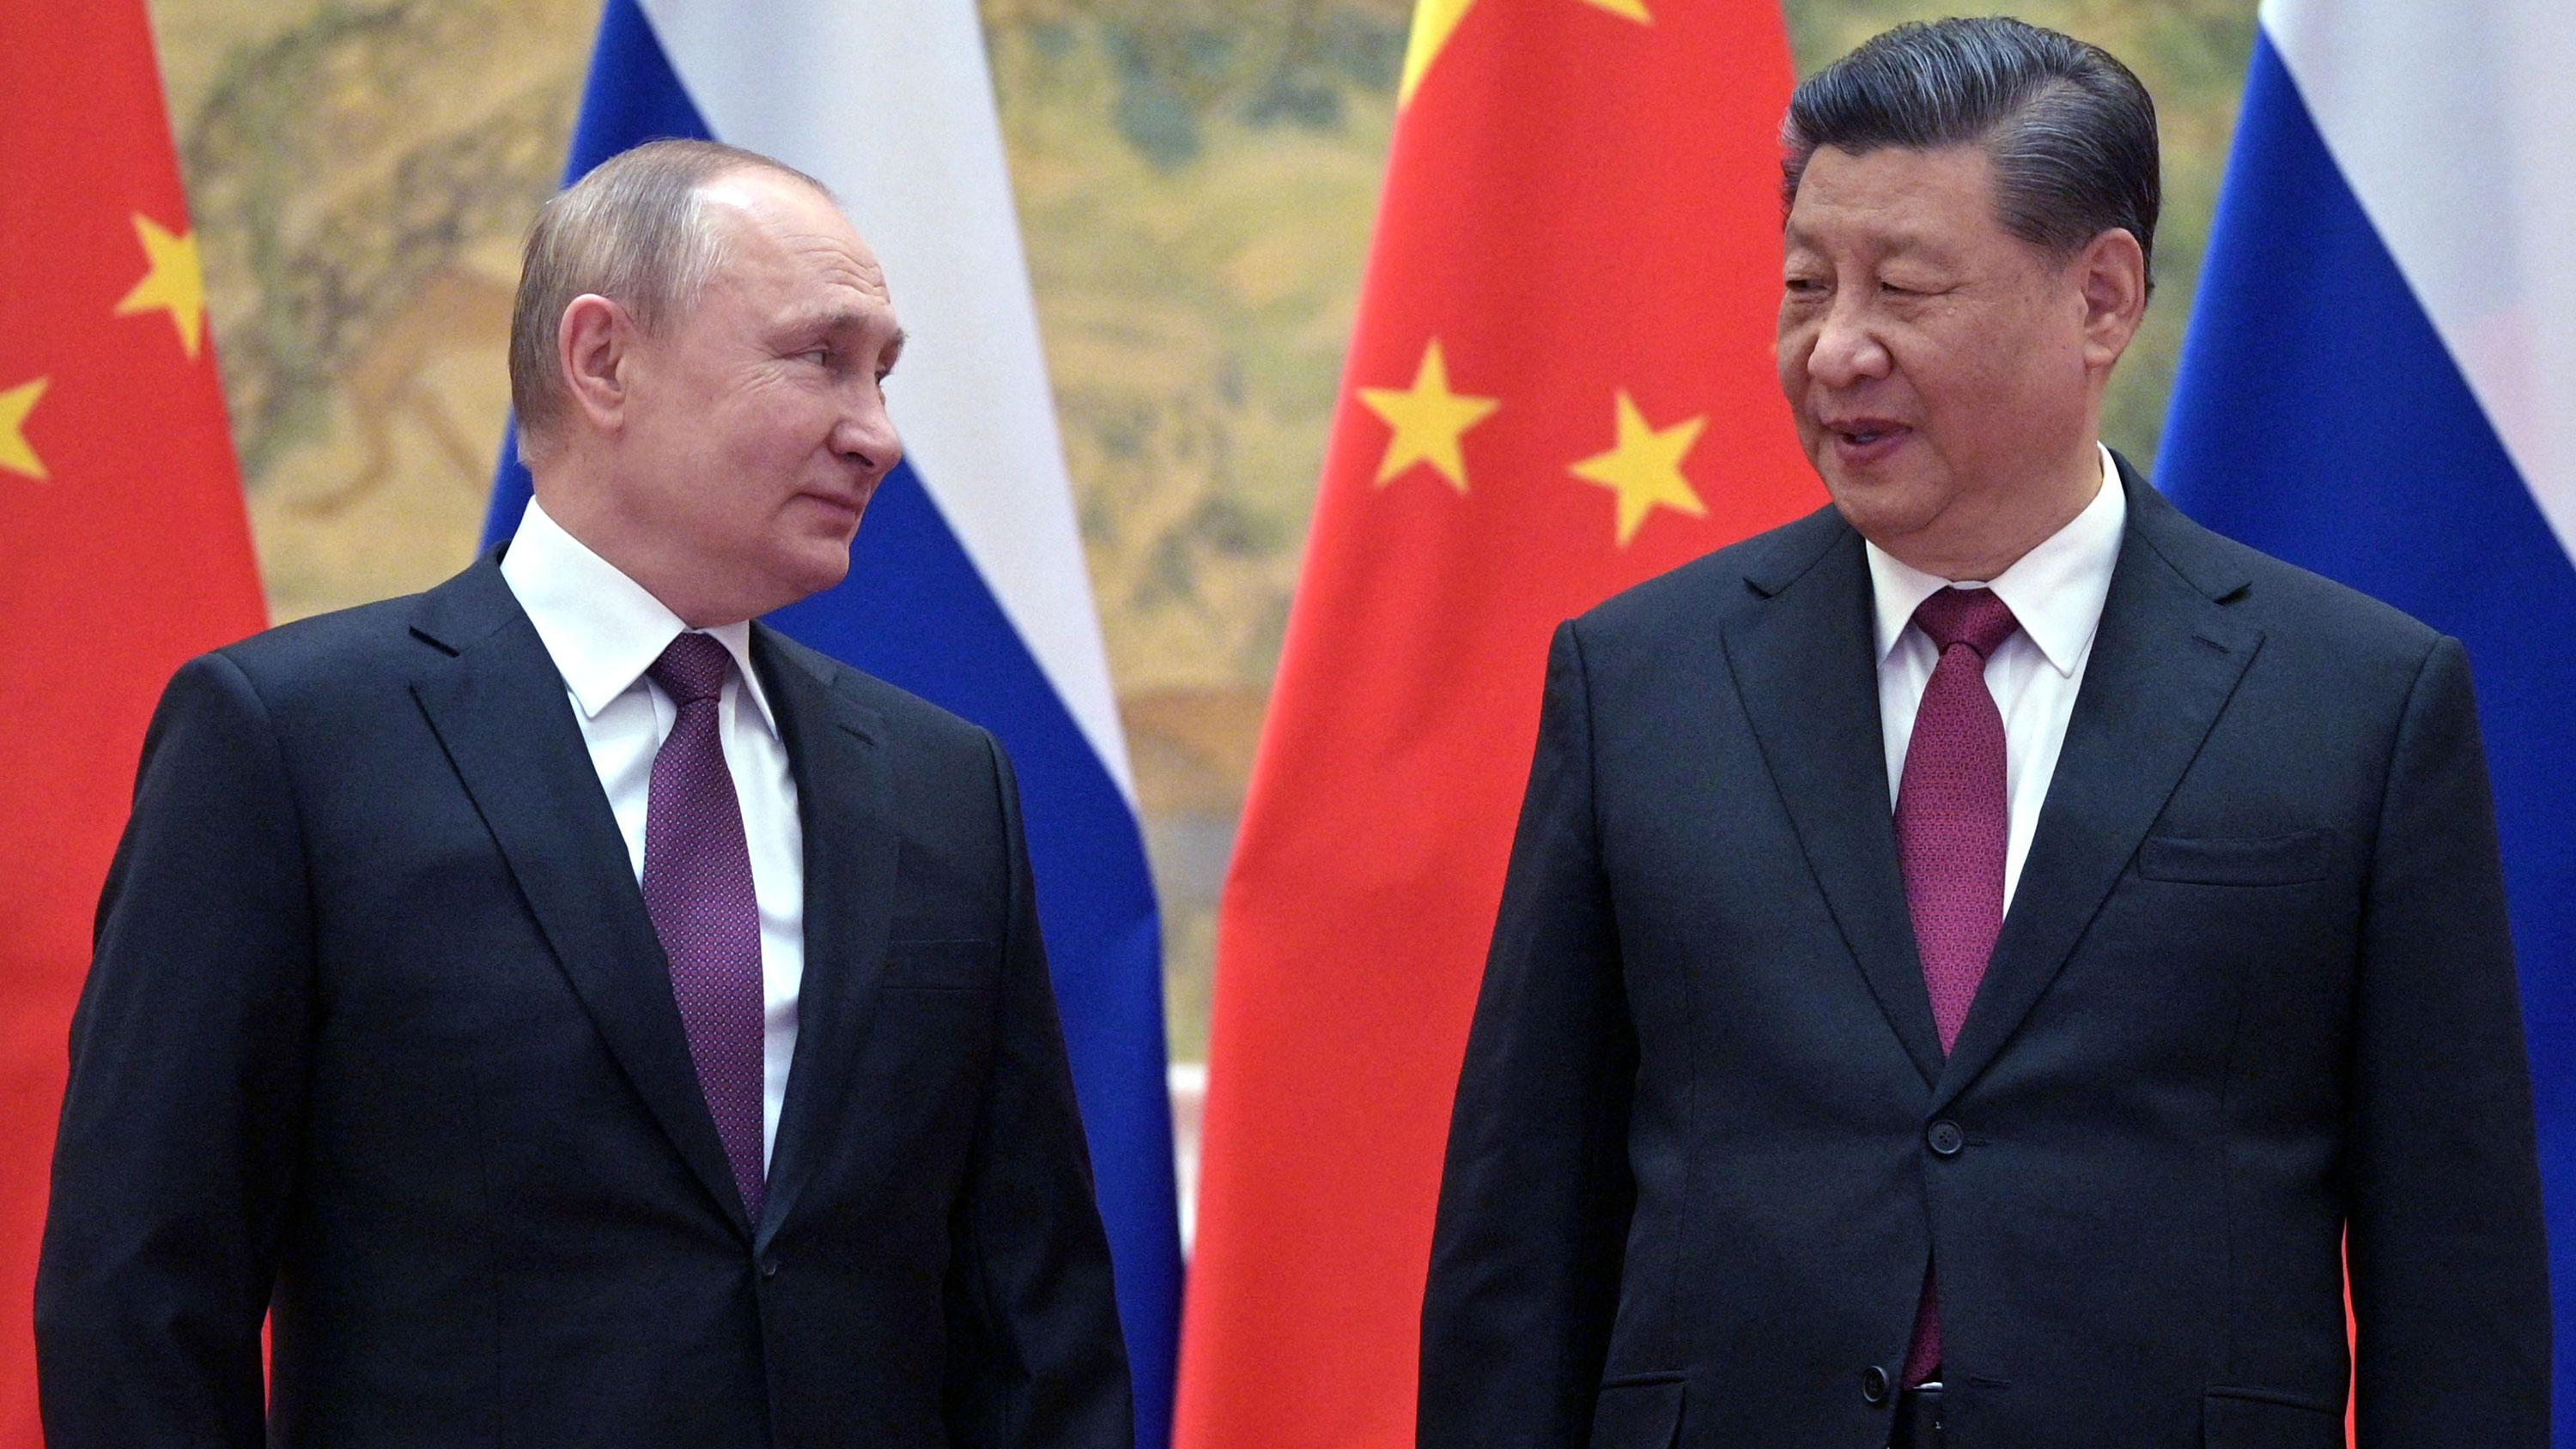 Russian President Vladimir Putin and Chinese President Xi Jinping pose for a photograph during their meeting in Beijing on February 4.